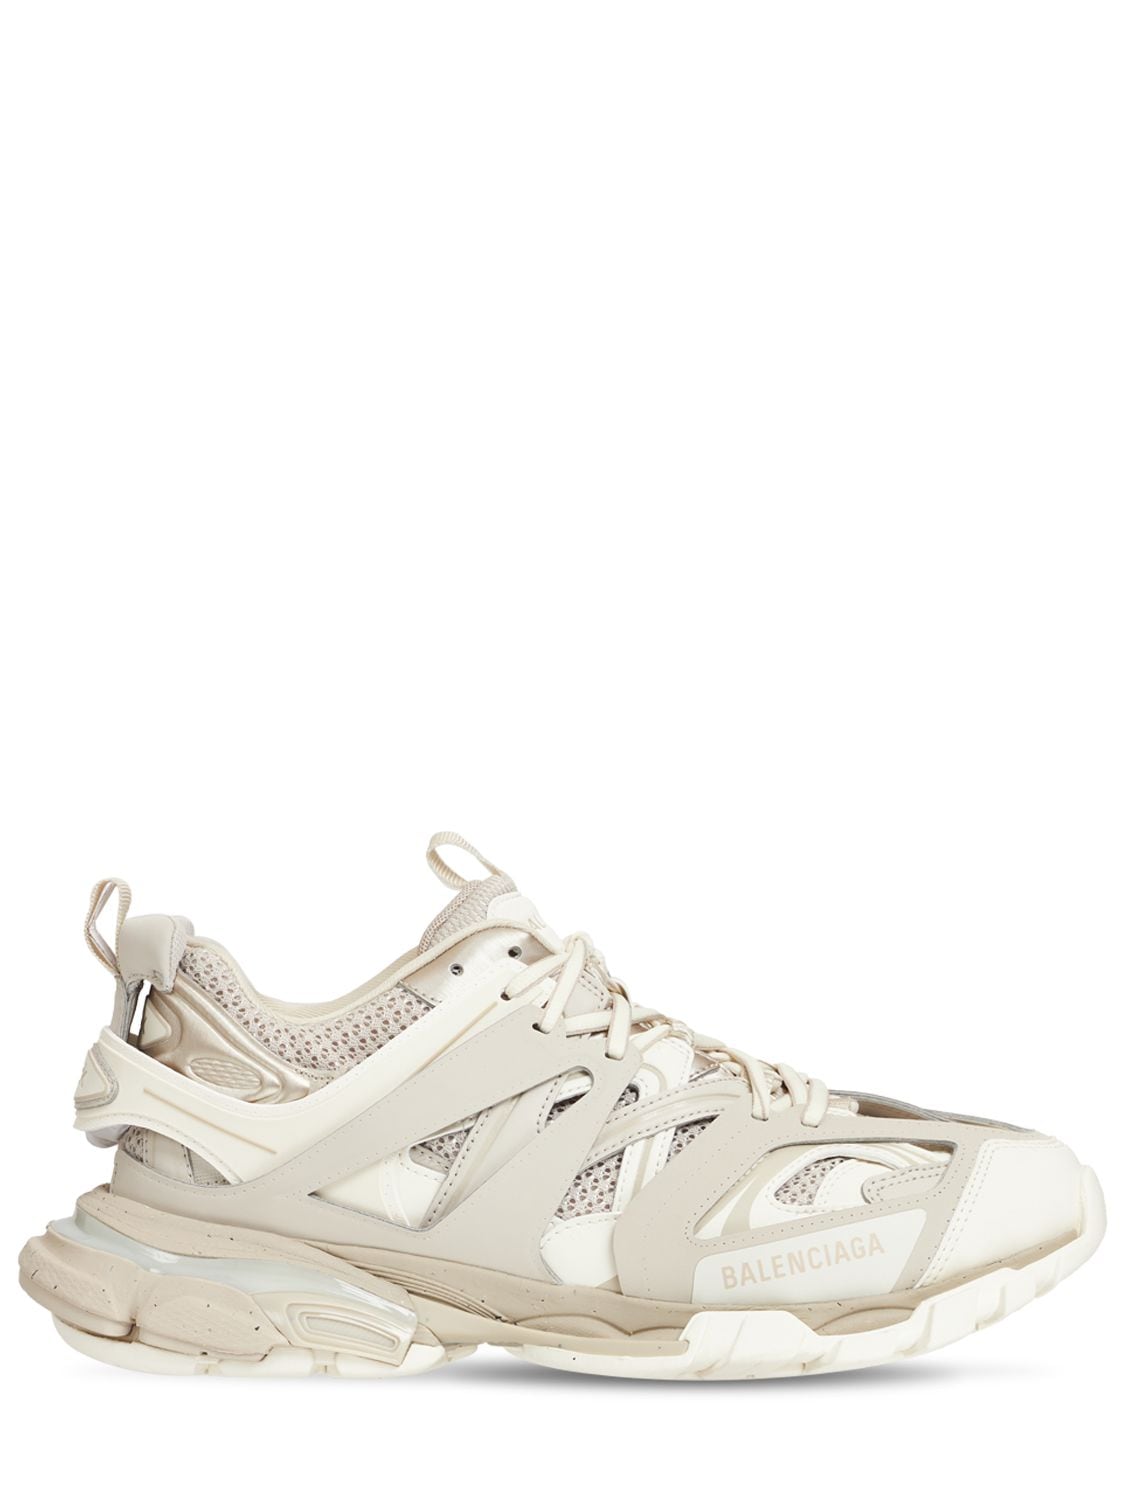 Balenciaga Track Faux Leather Sneakers In Beige